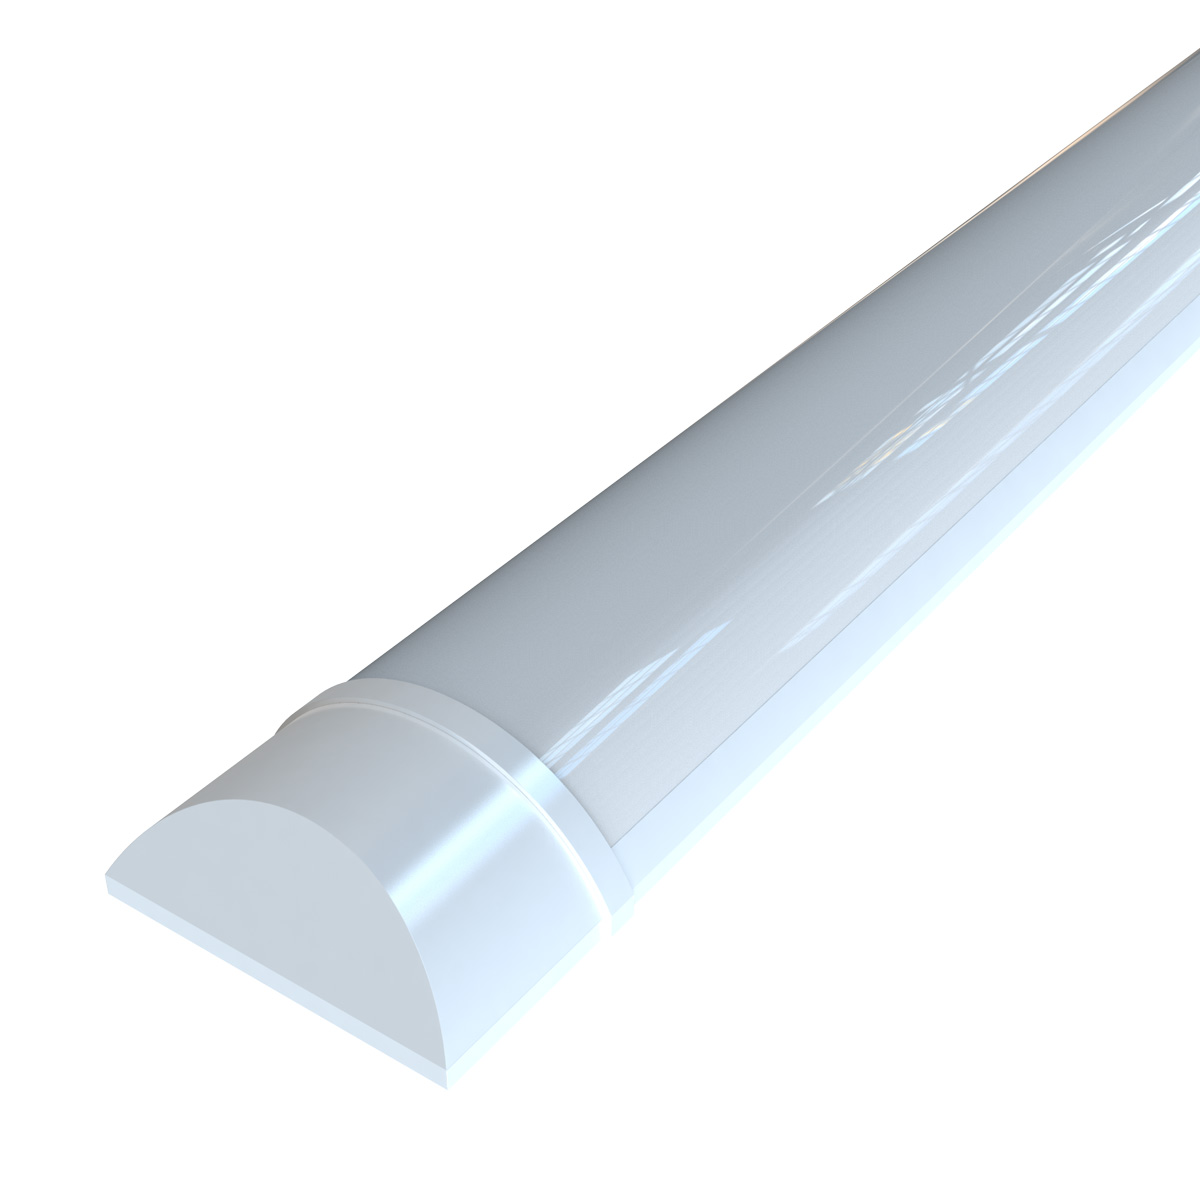 View 4 Foot 1200mm LED Batten 40w 4000K Natural White With Samsung Chips information